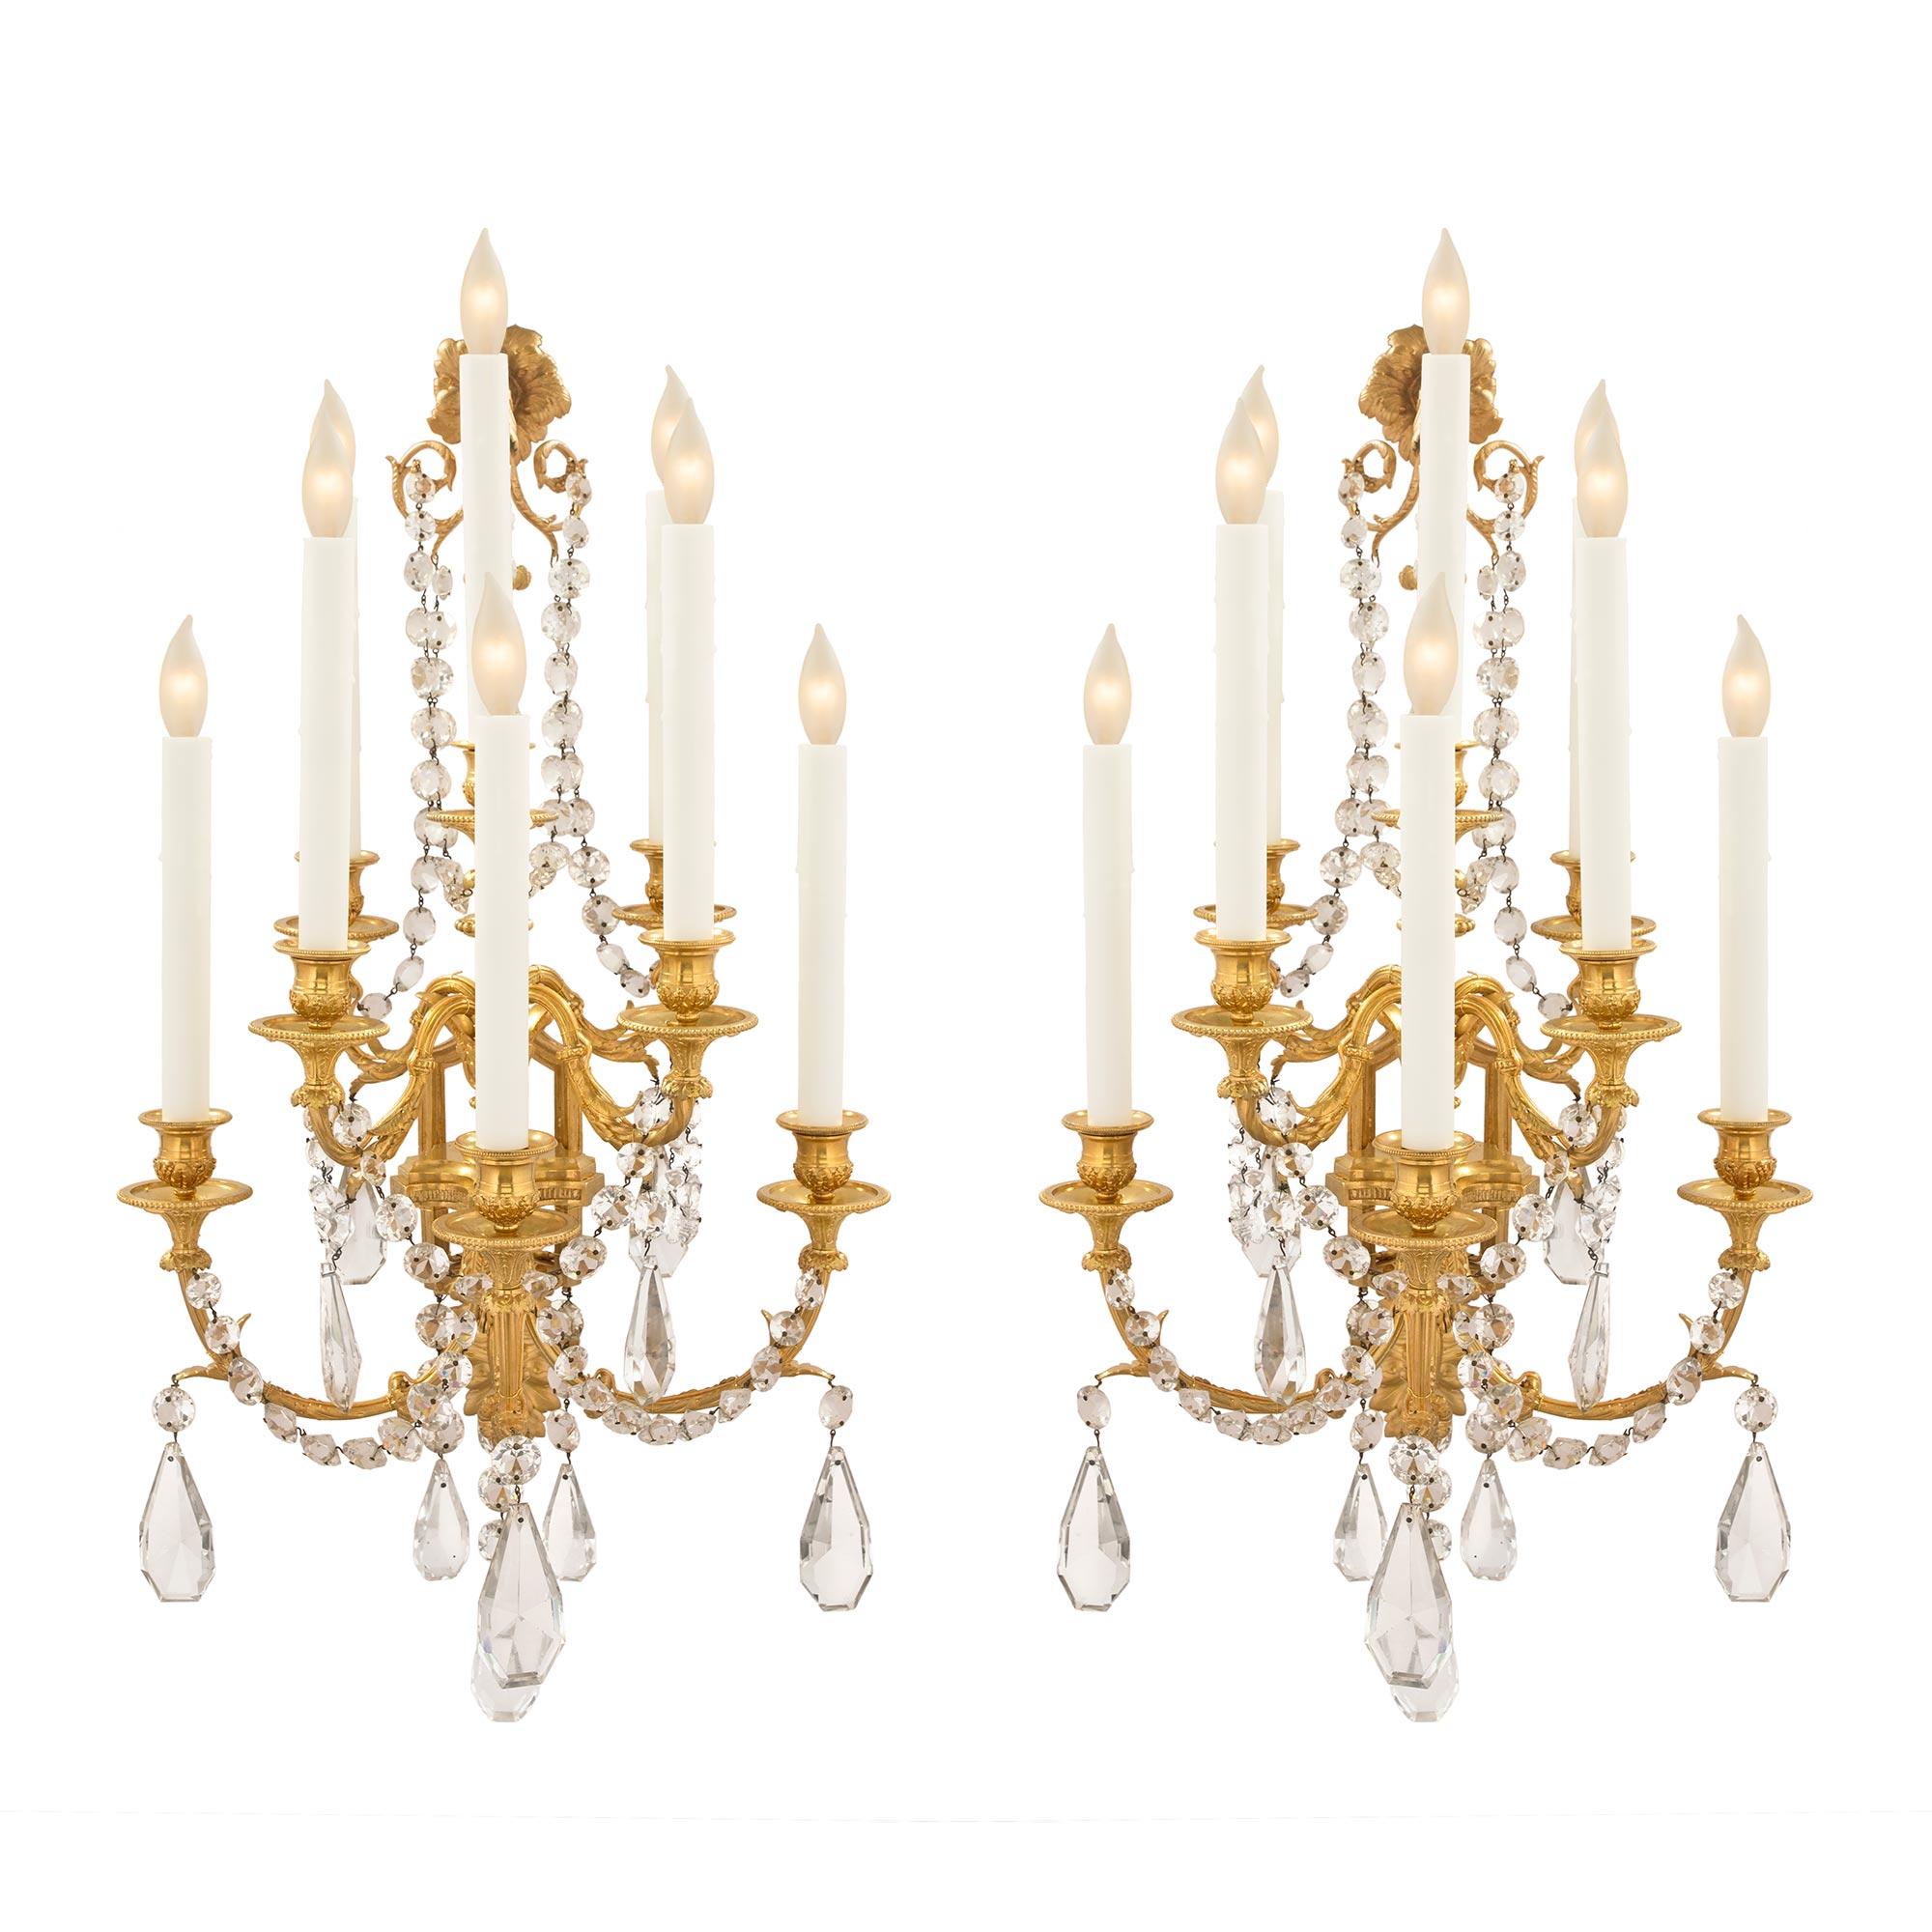 A stunning pair of French 19th century Louis XVI style ormolu and Baccarat crystal eight arm sconces. Each sconce is centered by a beautiful and richly chased foliate back plate with a scrolled wheat sprig. Each elegantly scrolled arm is adorned in